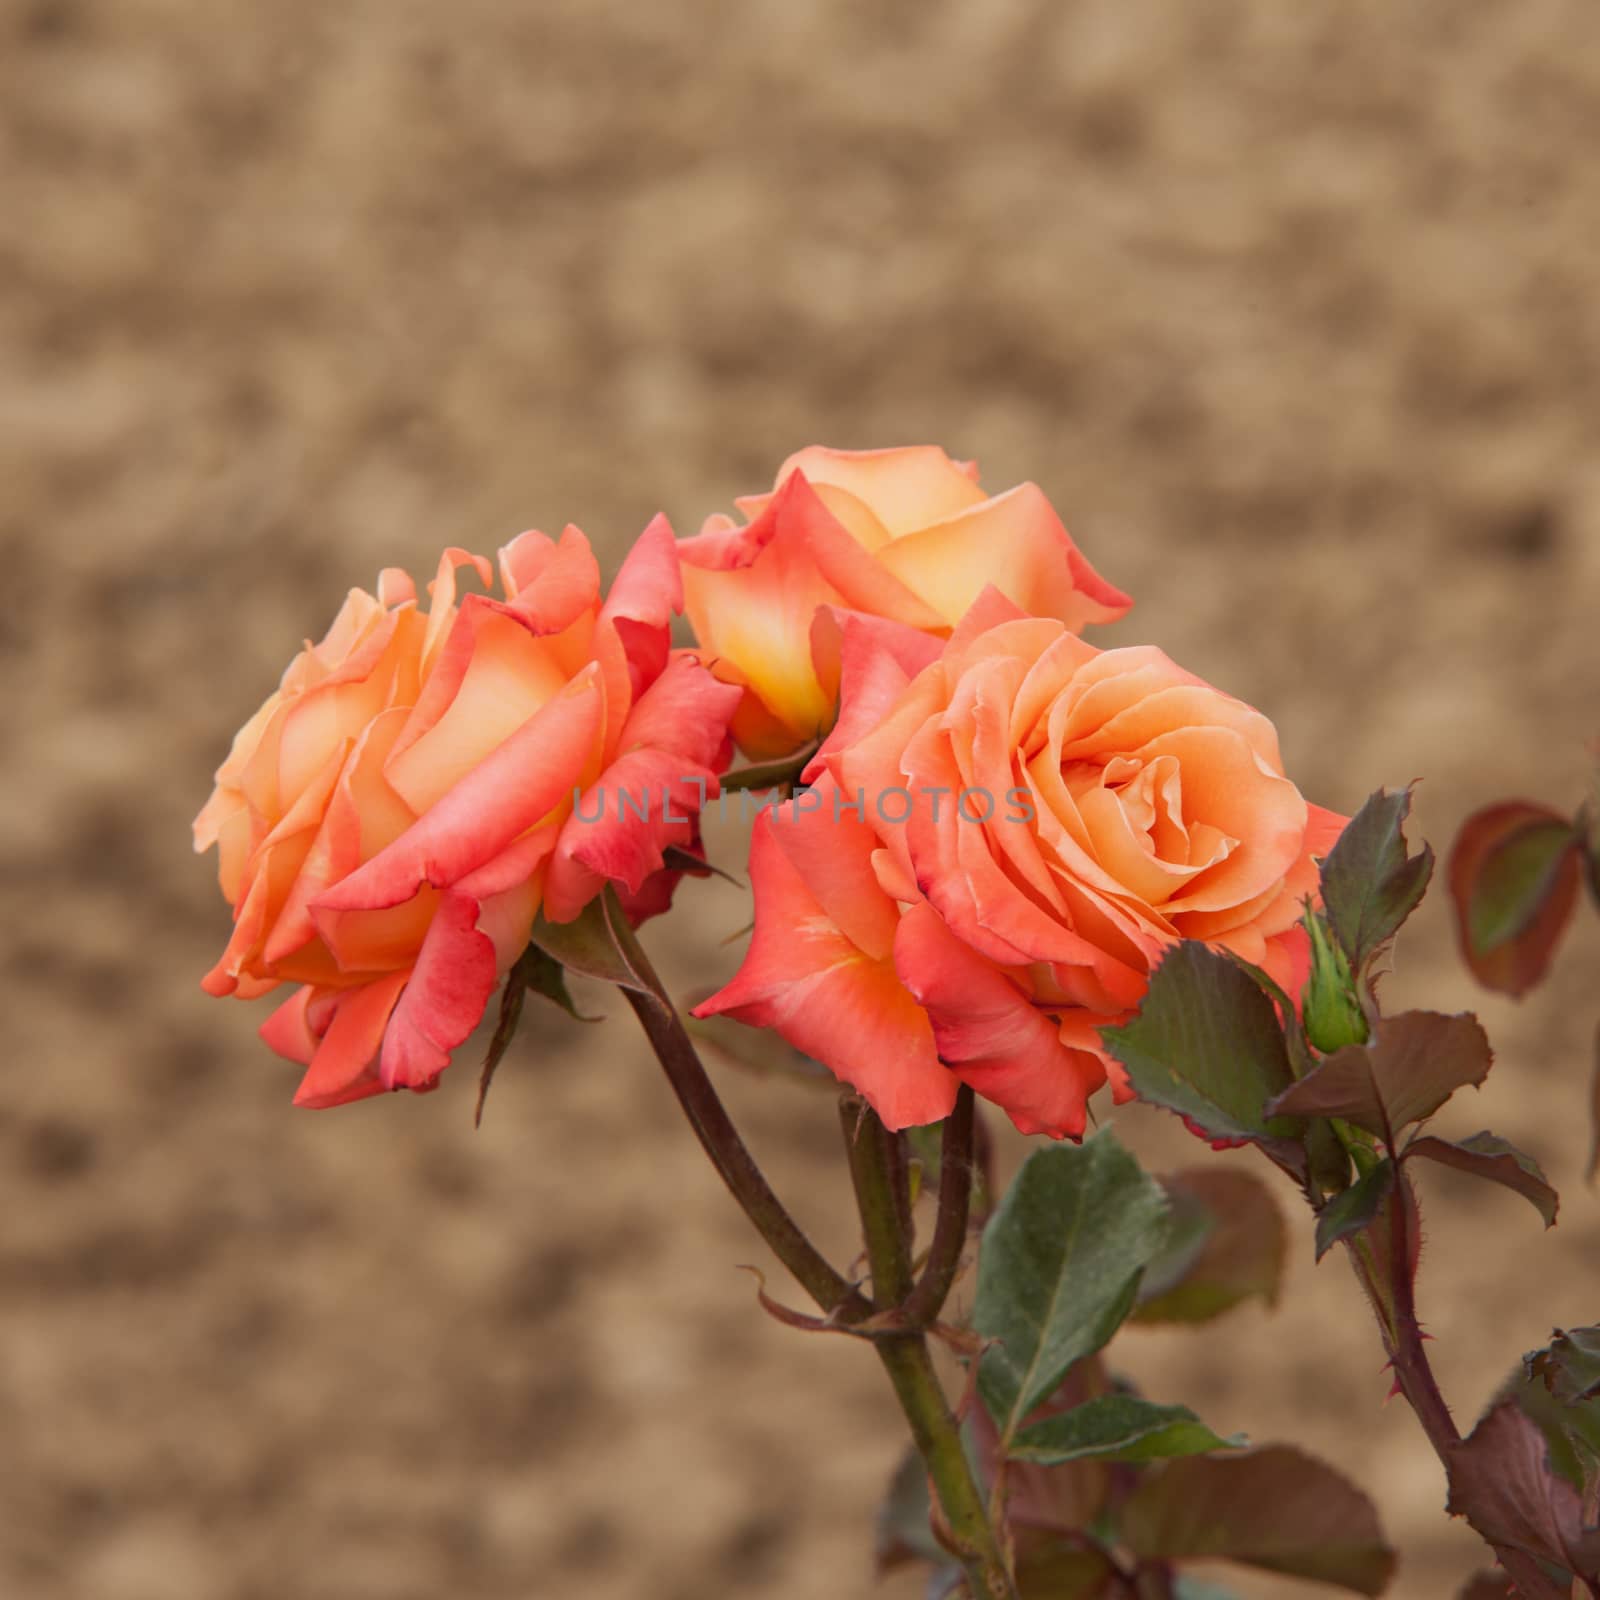 Roses by Koufax73